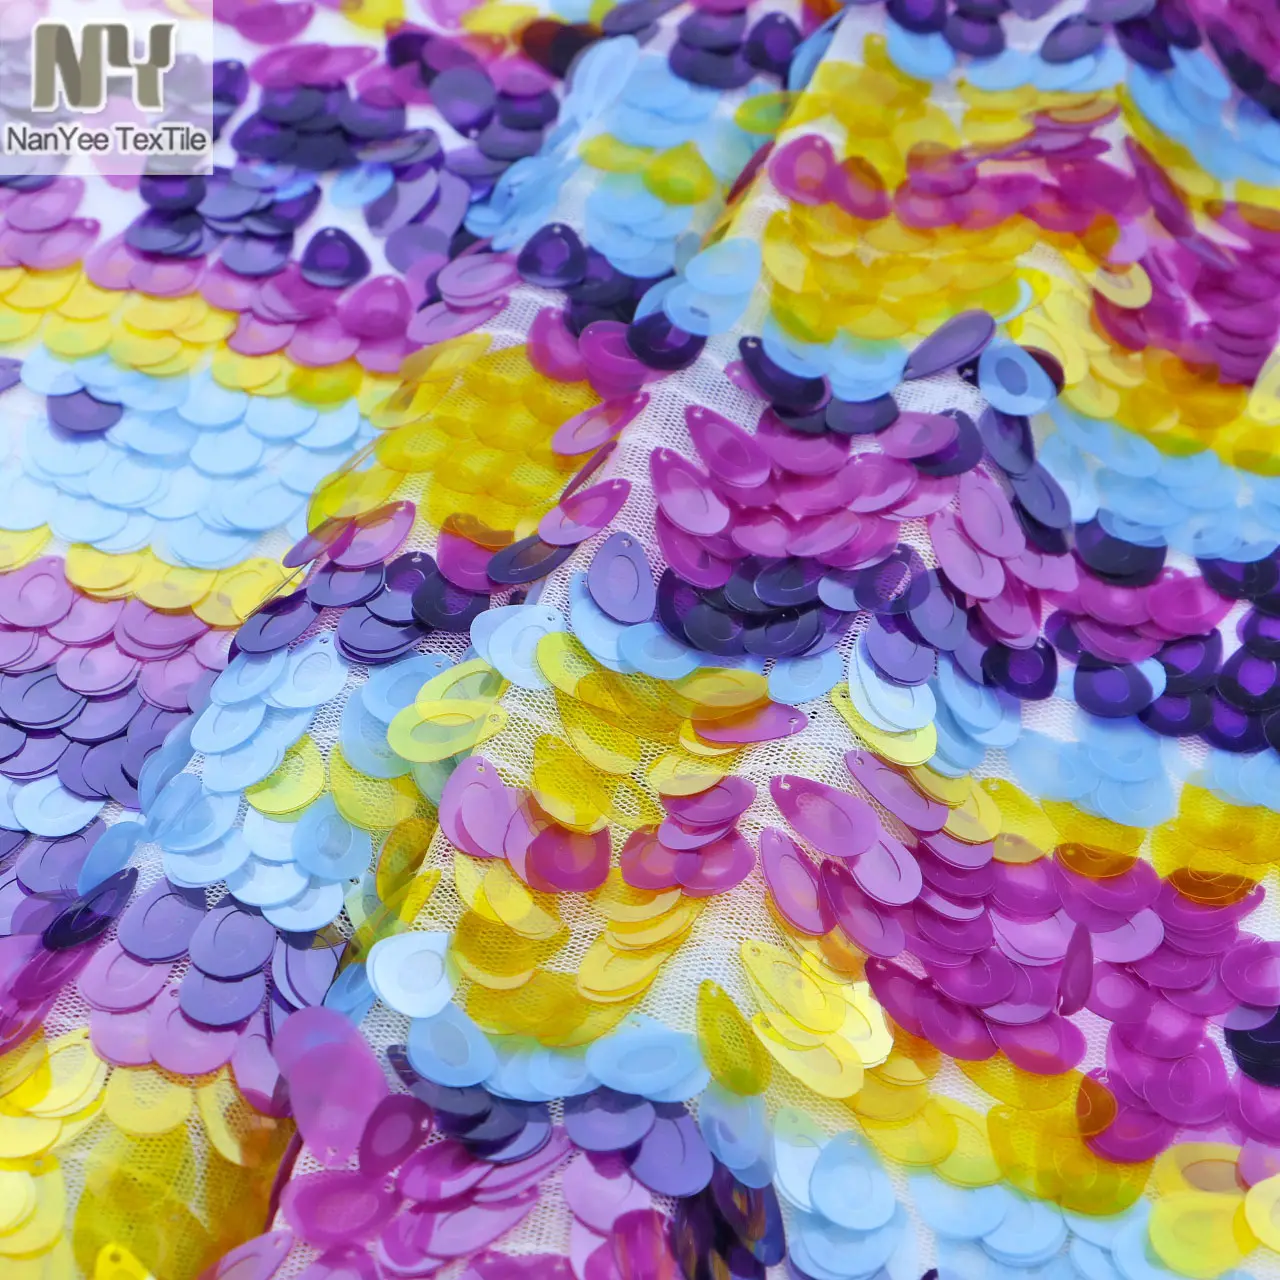 Nanyee Textile 9mm Multi Colors Heavy Weight 2 Layer Drop Sequin Fabrics With Zigzag Wave Pattern